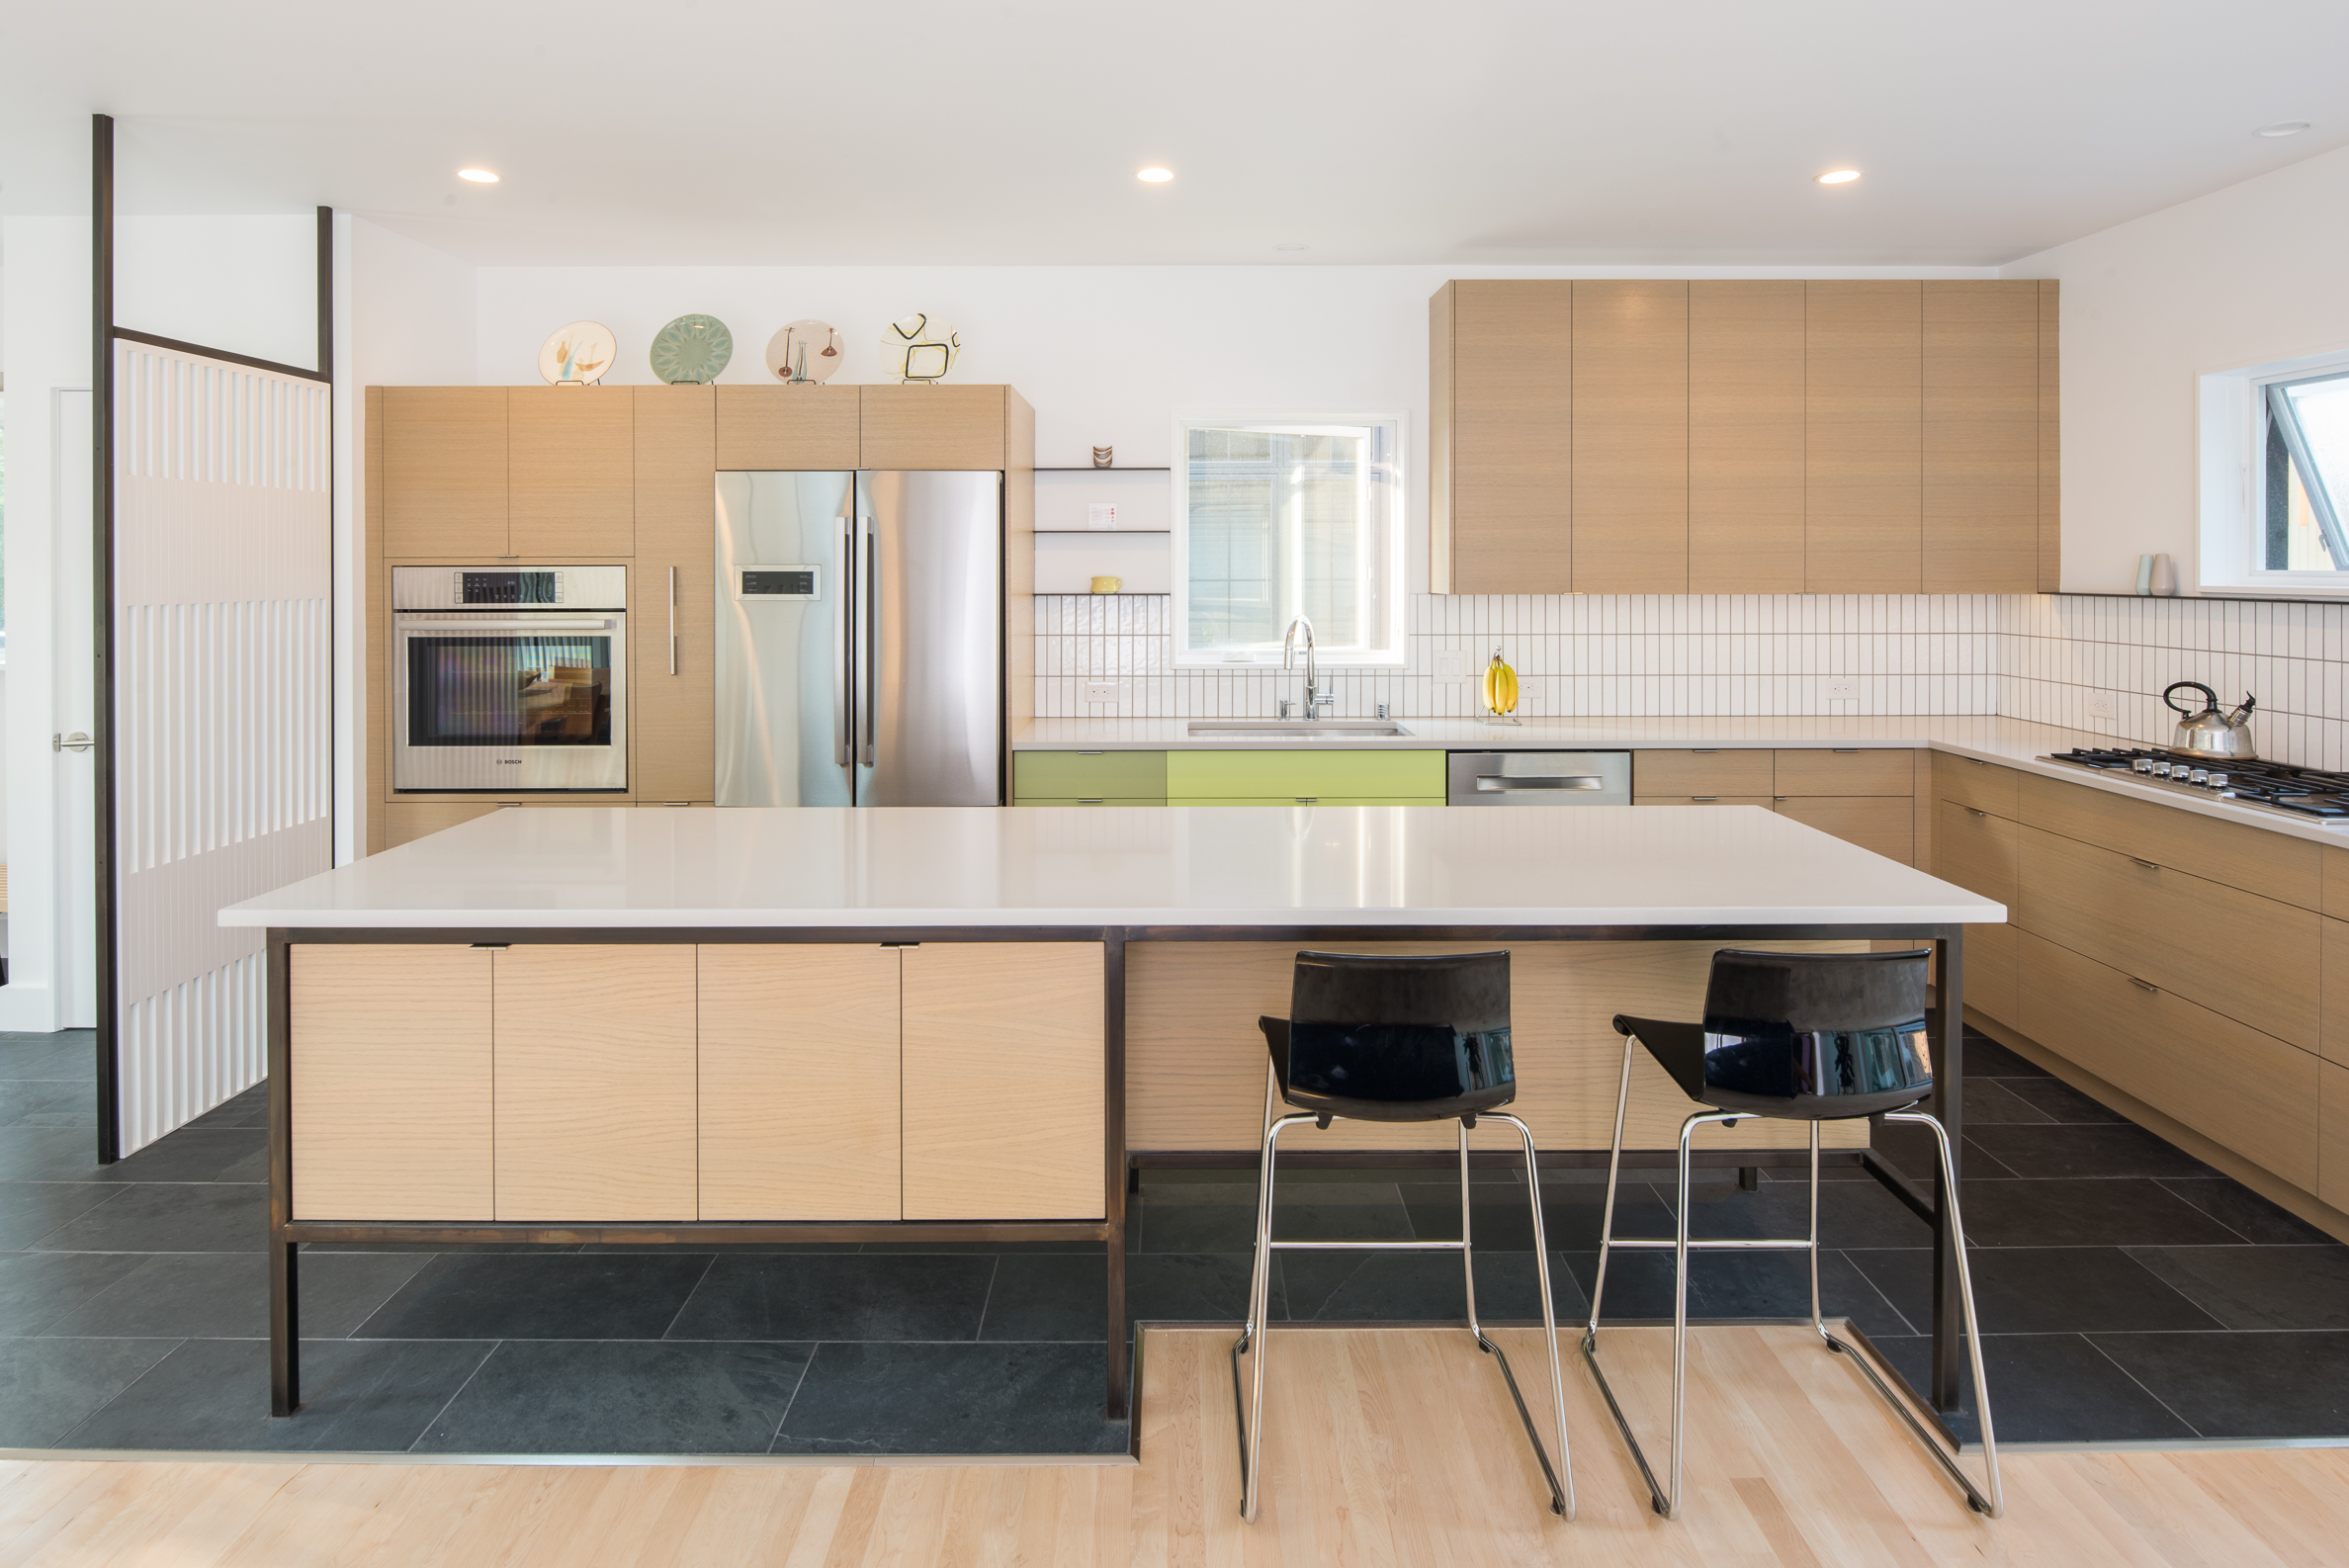 Custom mid-century kitchen design with colorful cabinetry and steel accents